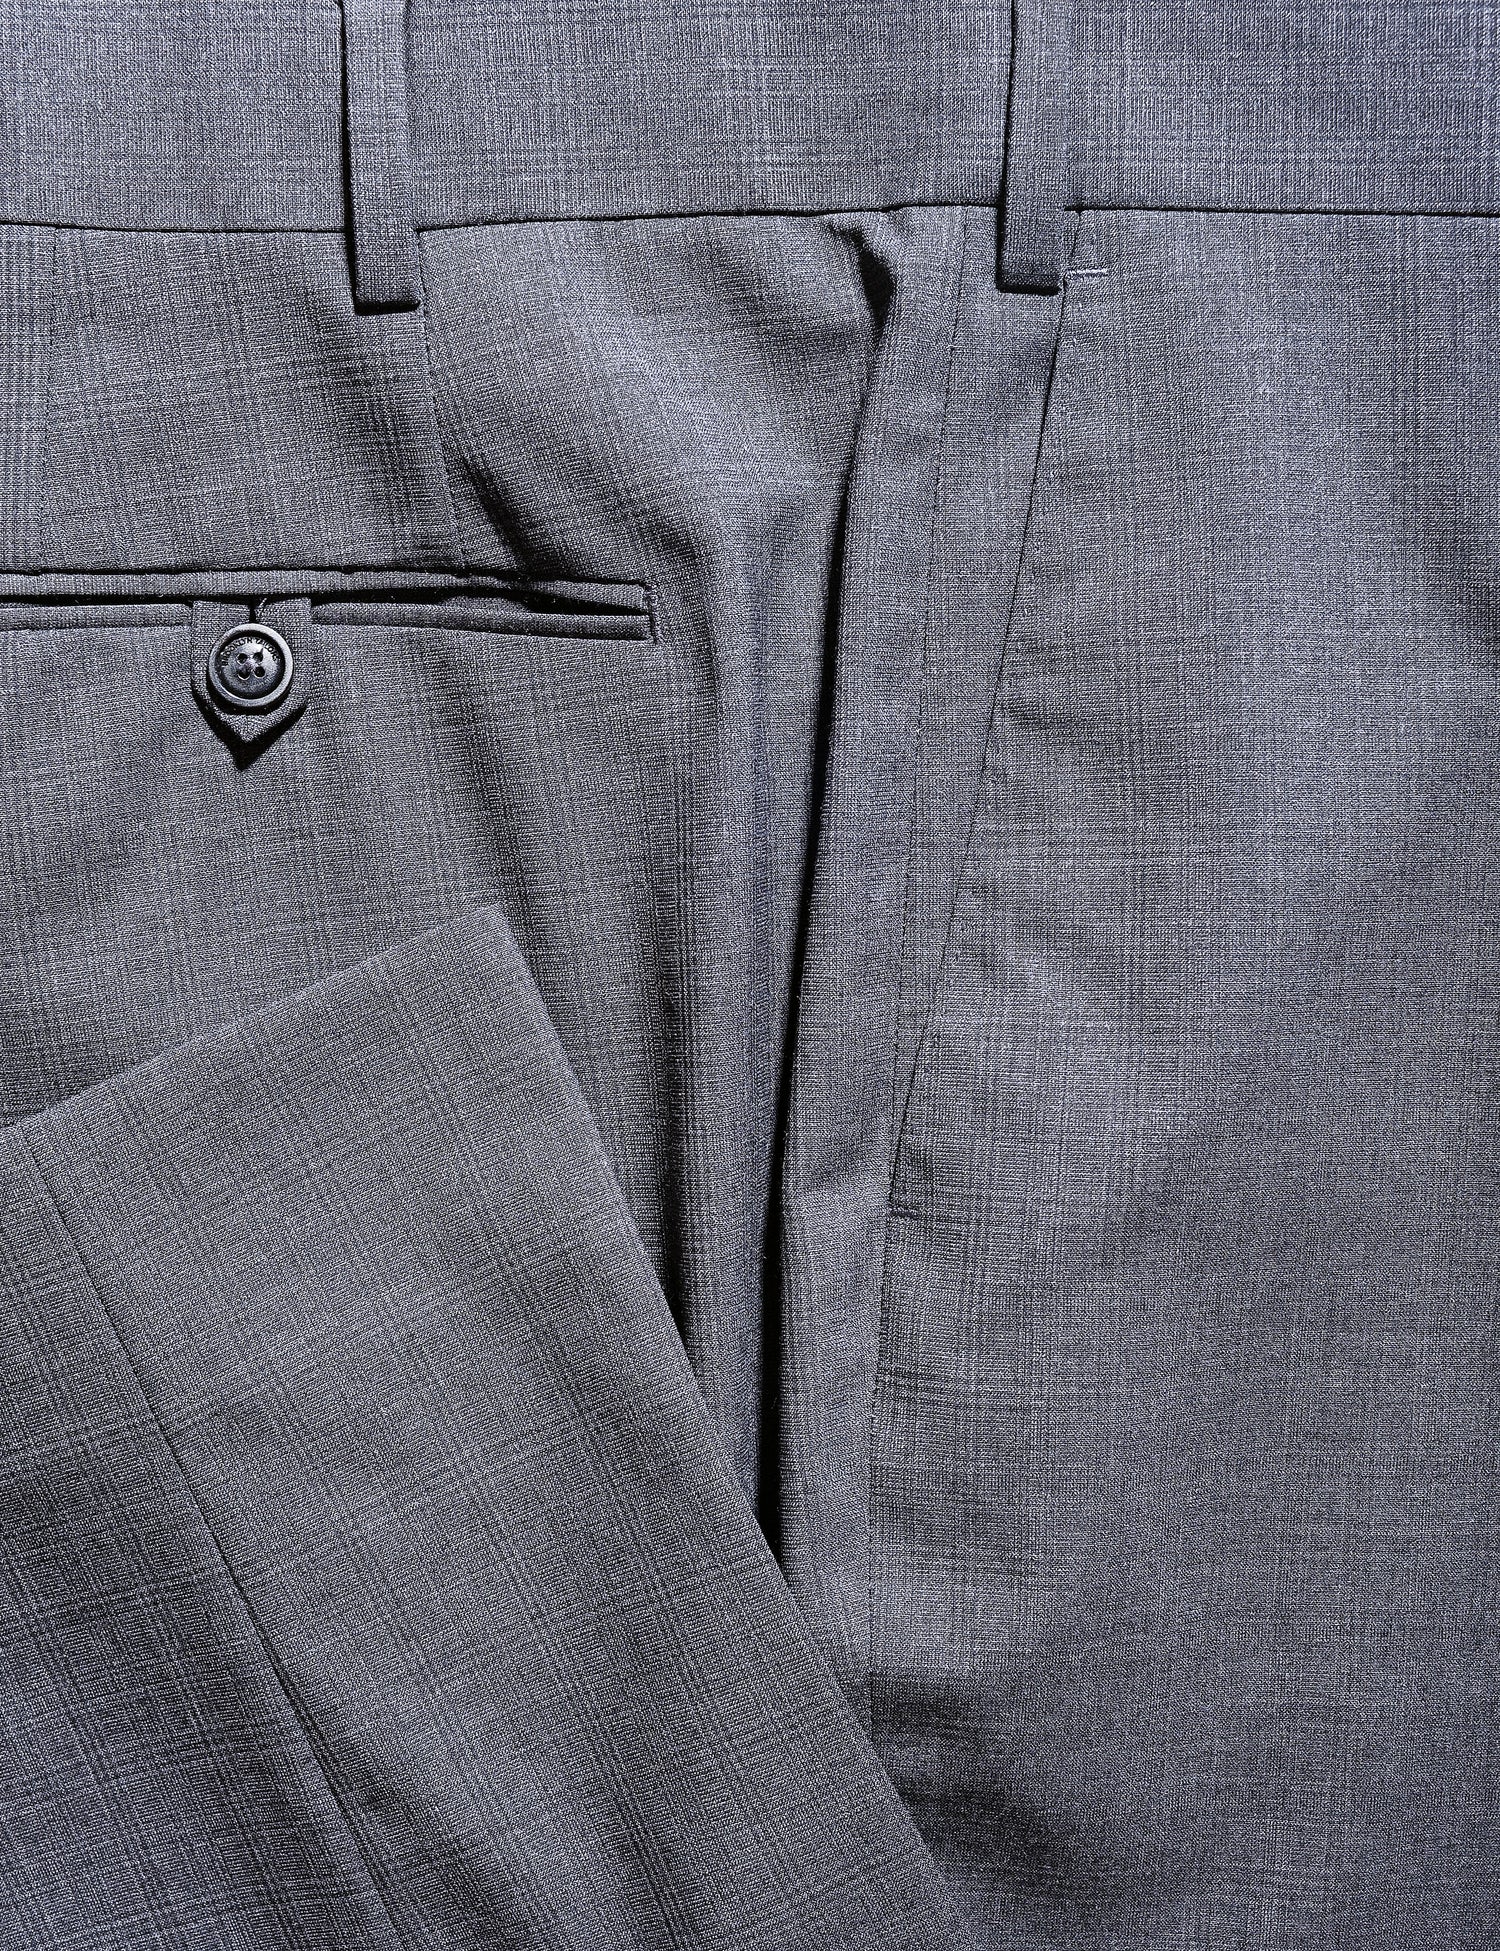 Detail of BKT50 Tailored Trousers in Tropical Wool - Gray Plaid showing hem, back pocket, and fabric pattern